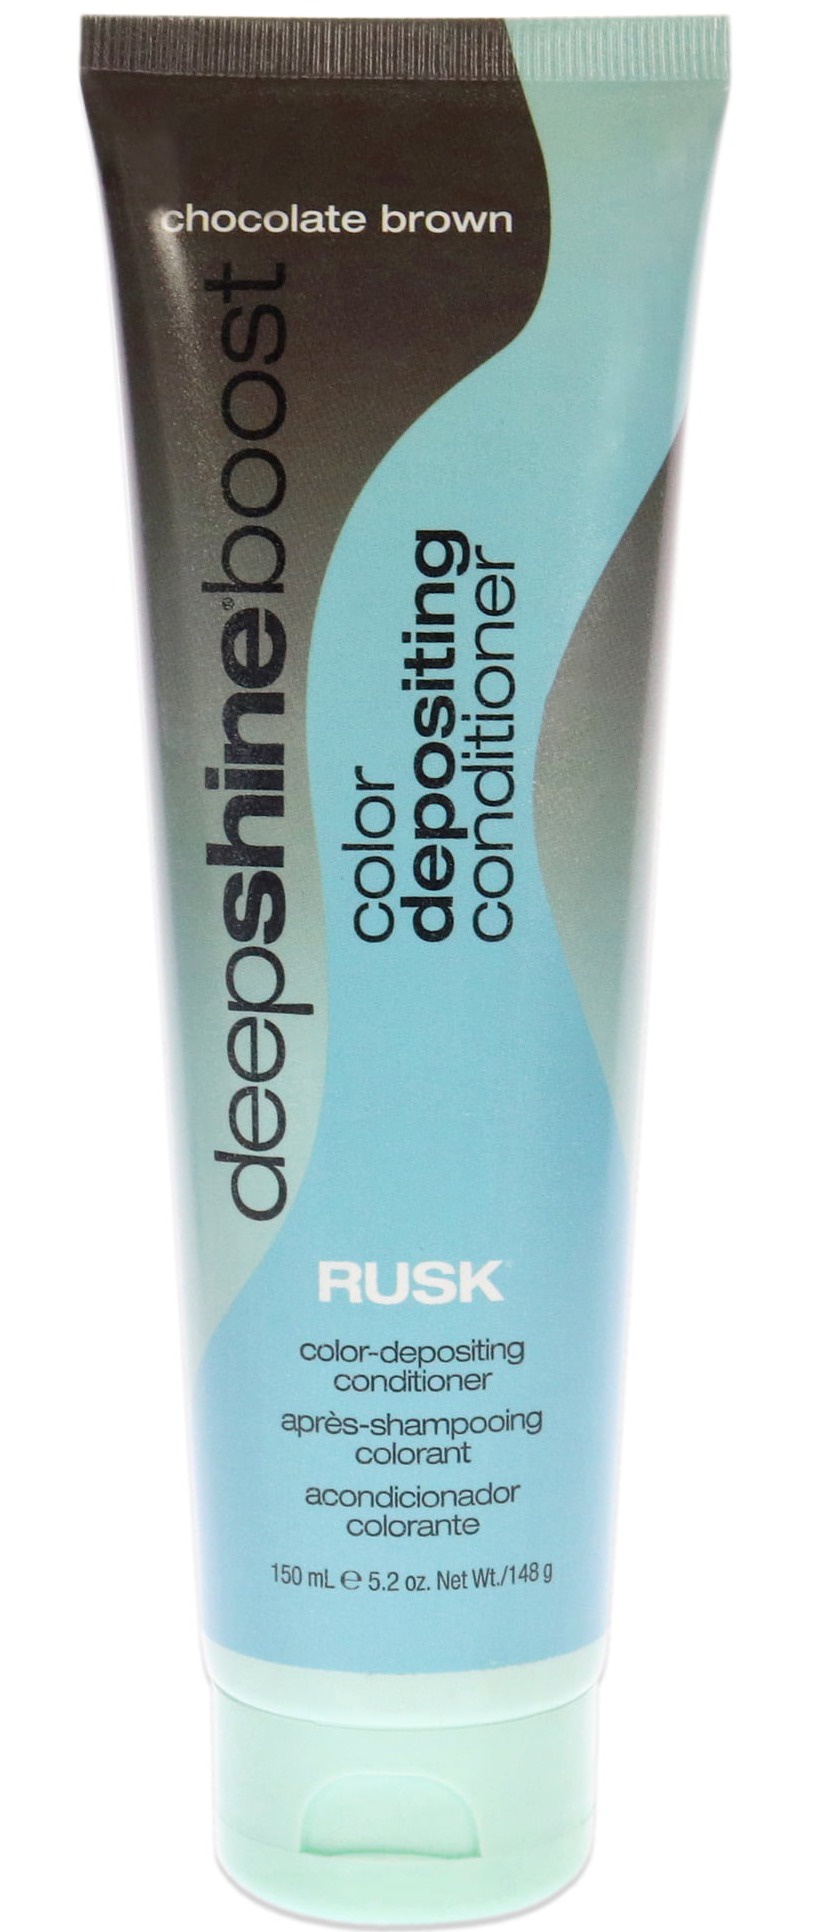 Rusk Deepshine Boost Color Depositing Conditioner - Chocolate Brown